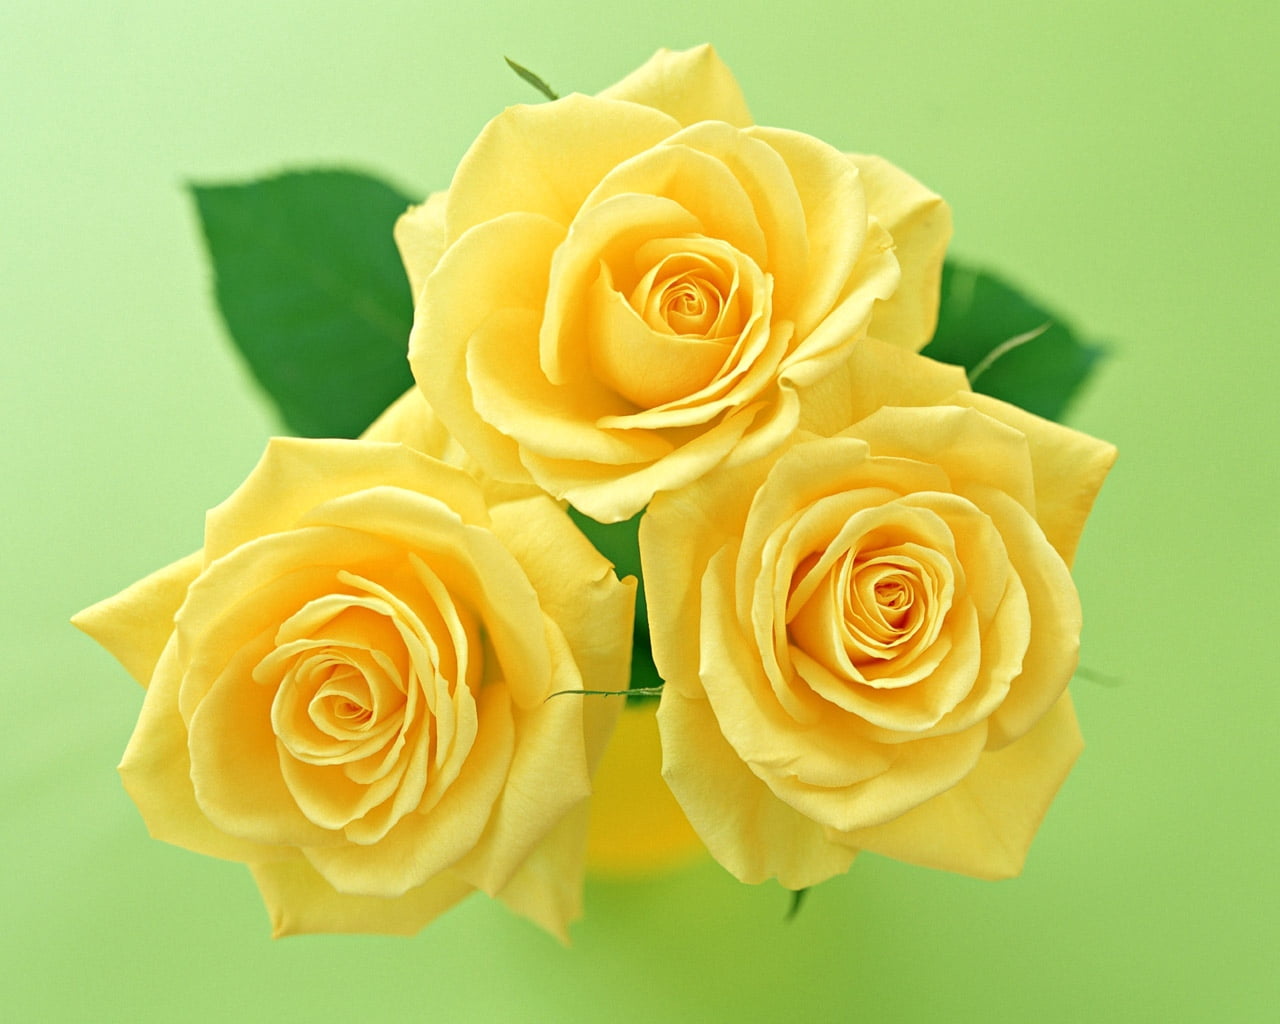 three yellow rose flowers, roses, rose - Flower, nature, close-up